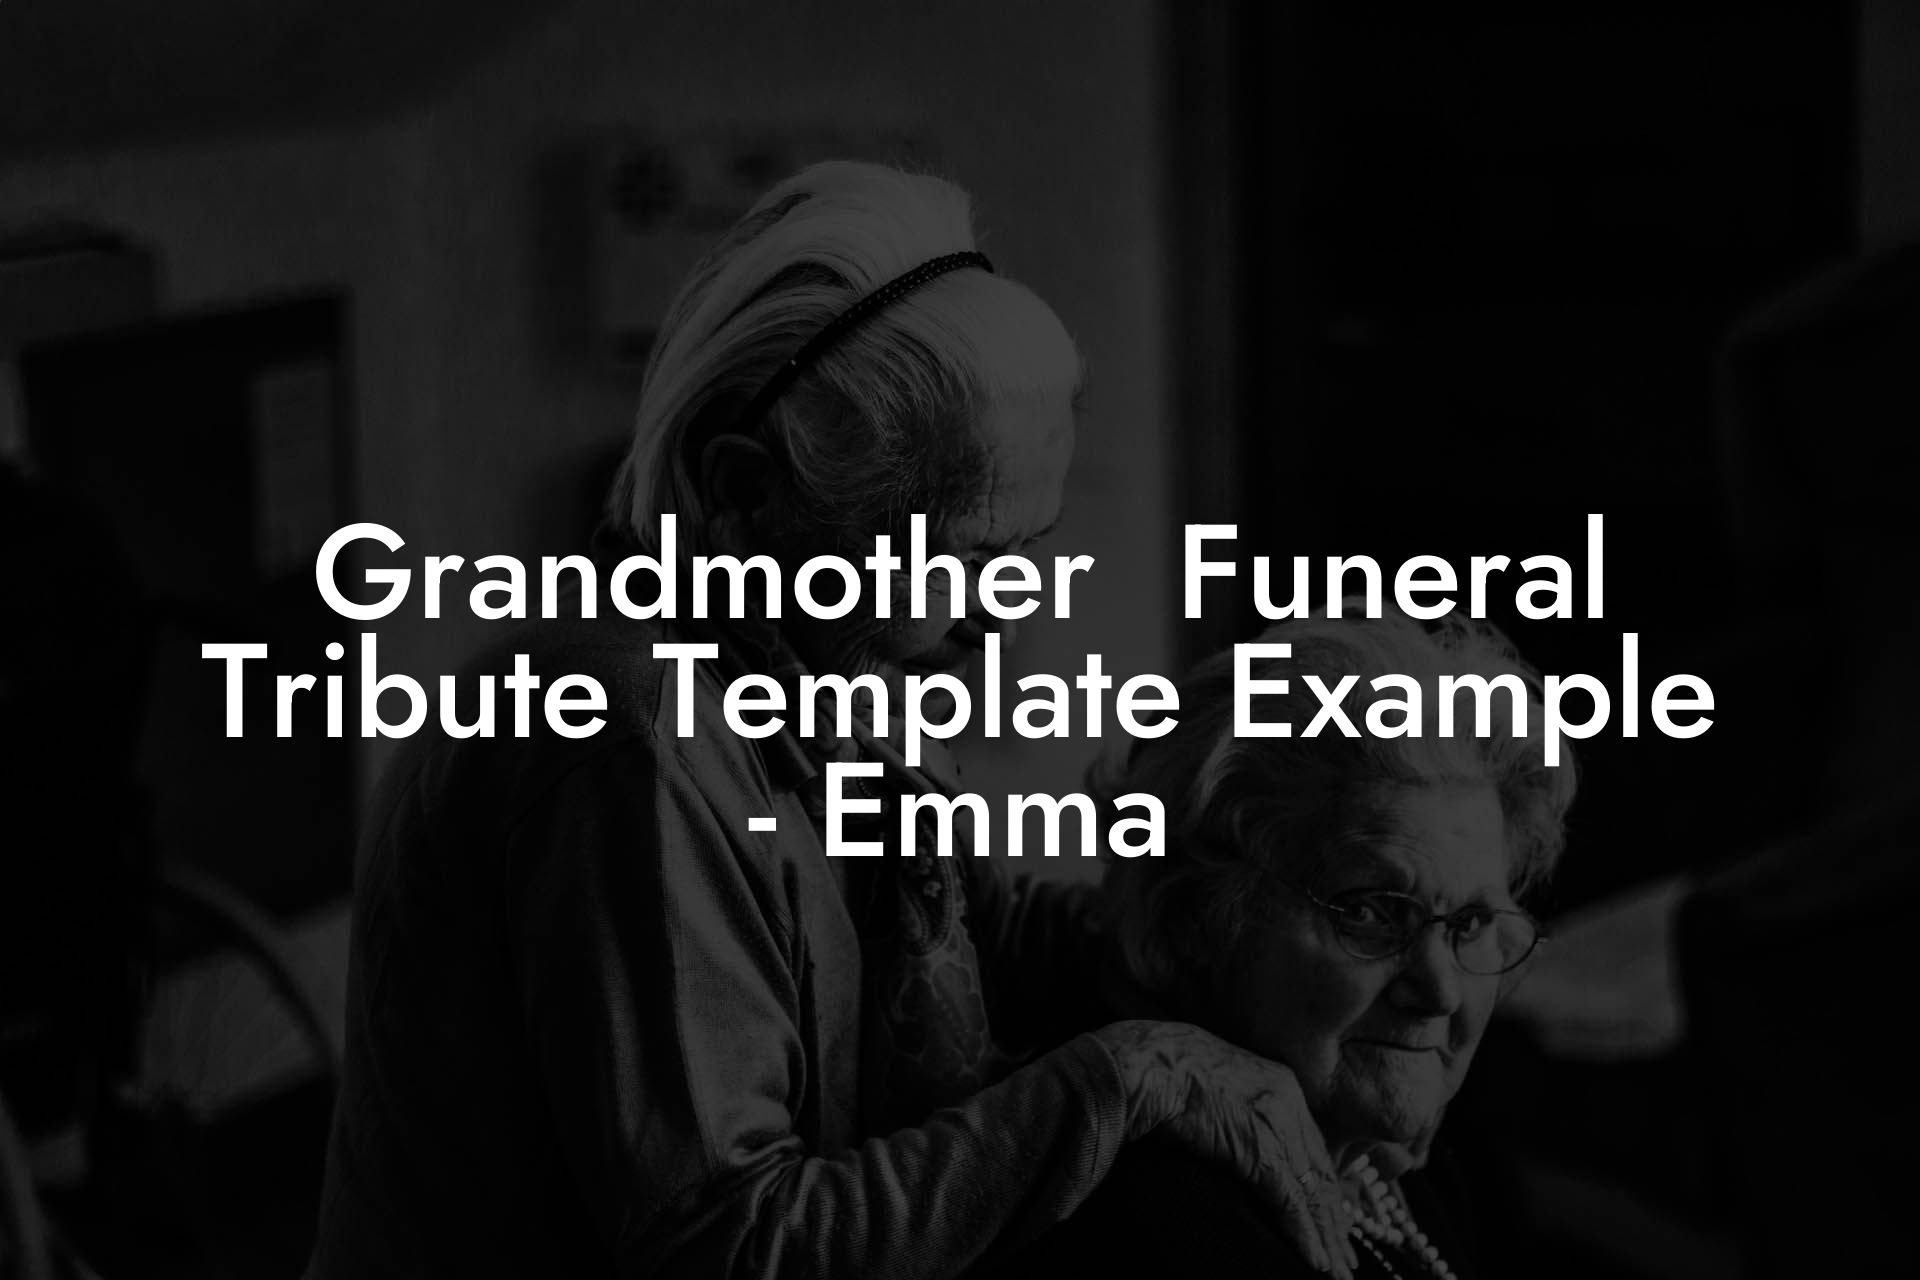 Grandmother Funeral Tribute Template Example - Emma - Eulogy Assistant